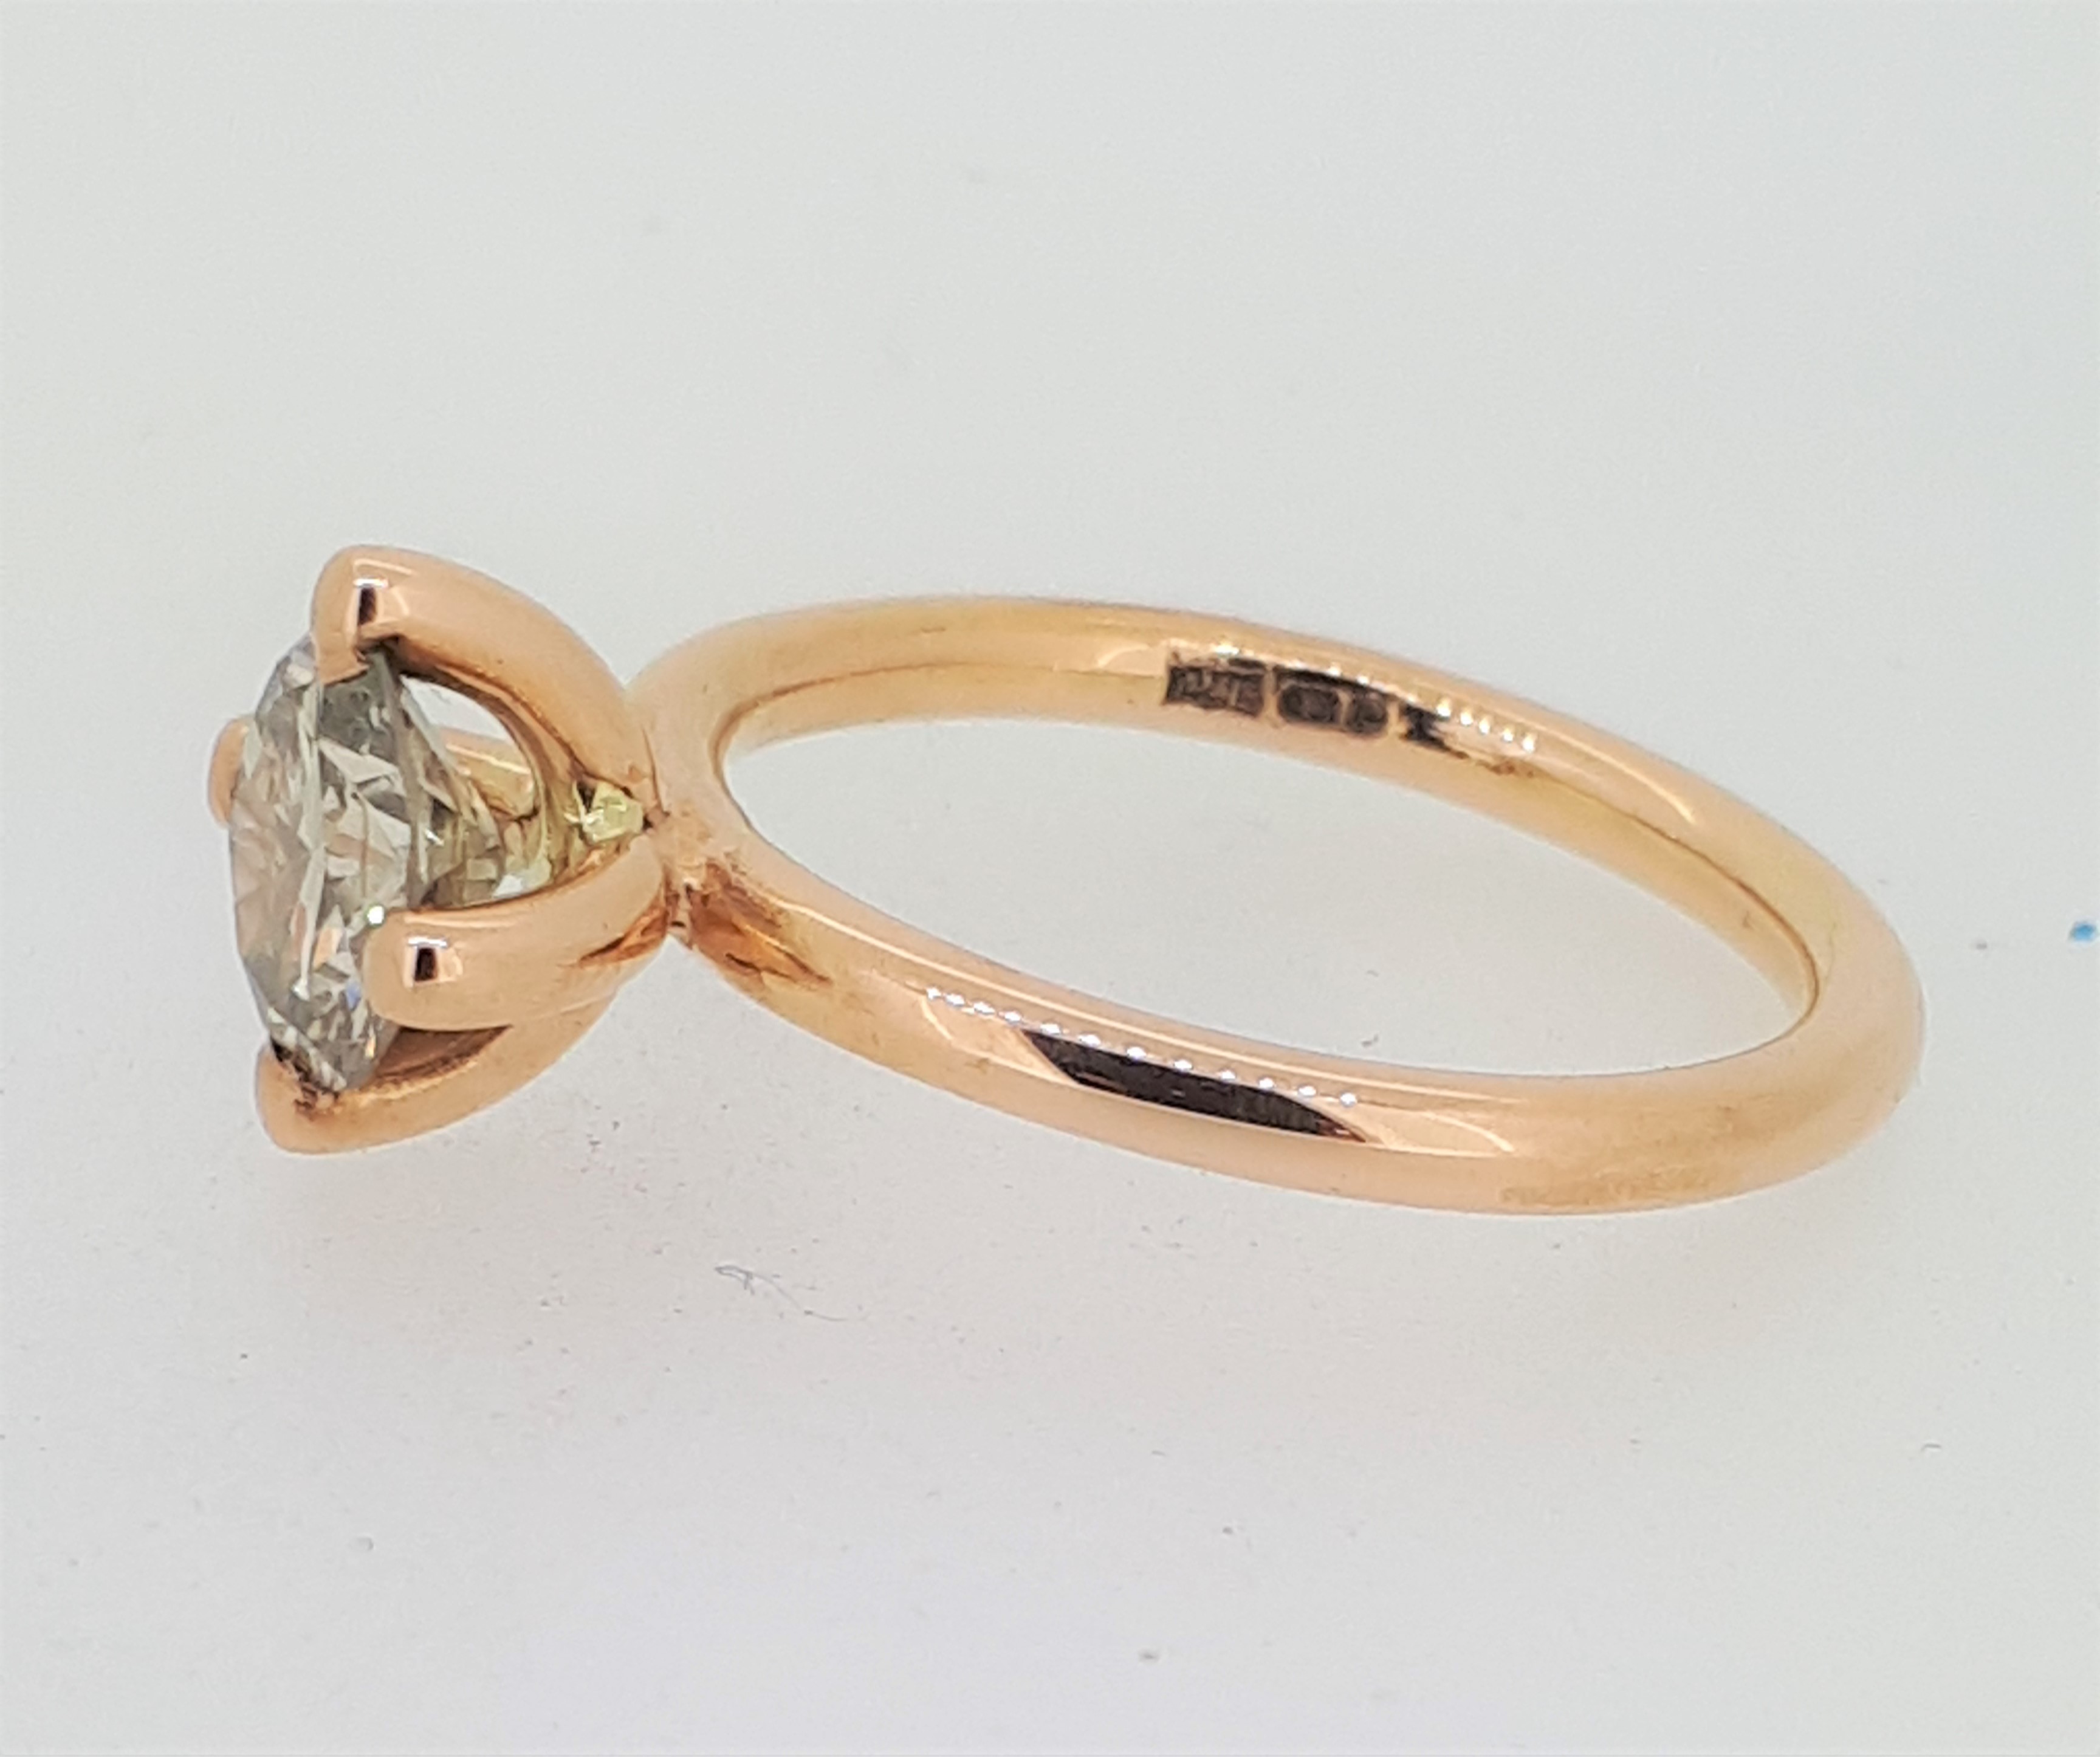 Handmade 18ct (750) Rose Gold +1ct Cognac Diamond Four Claw Solitaire Ring - Image 3 of 7